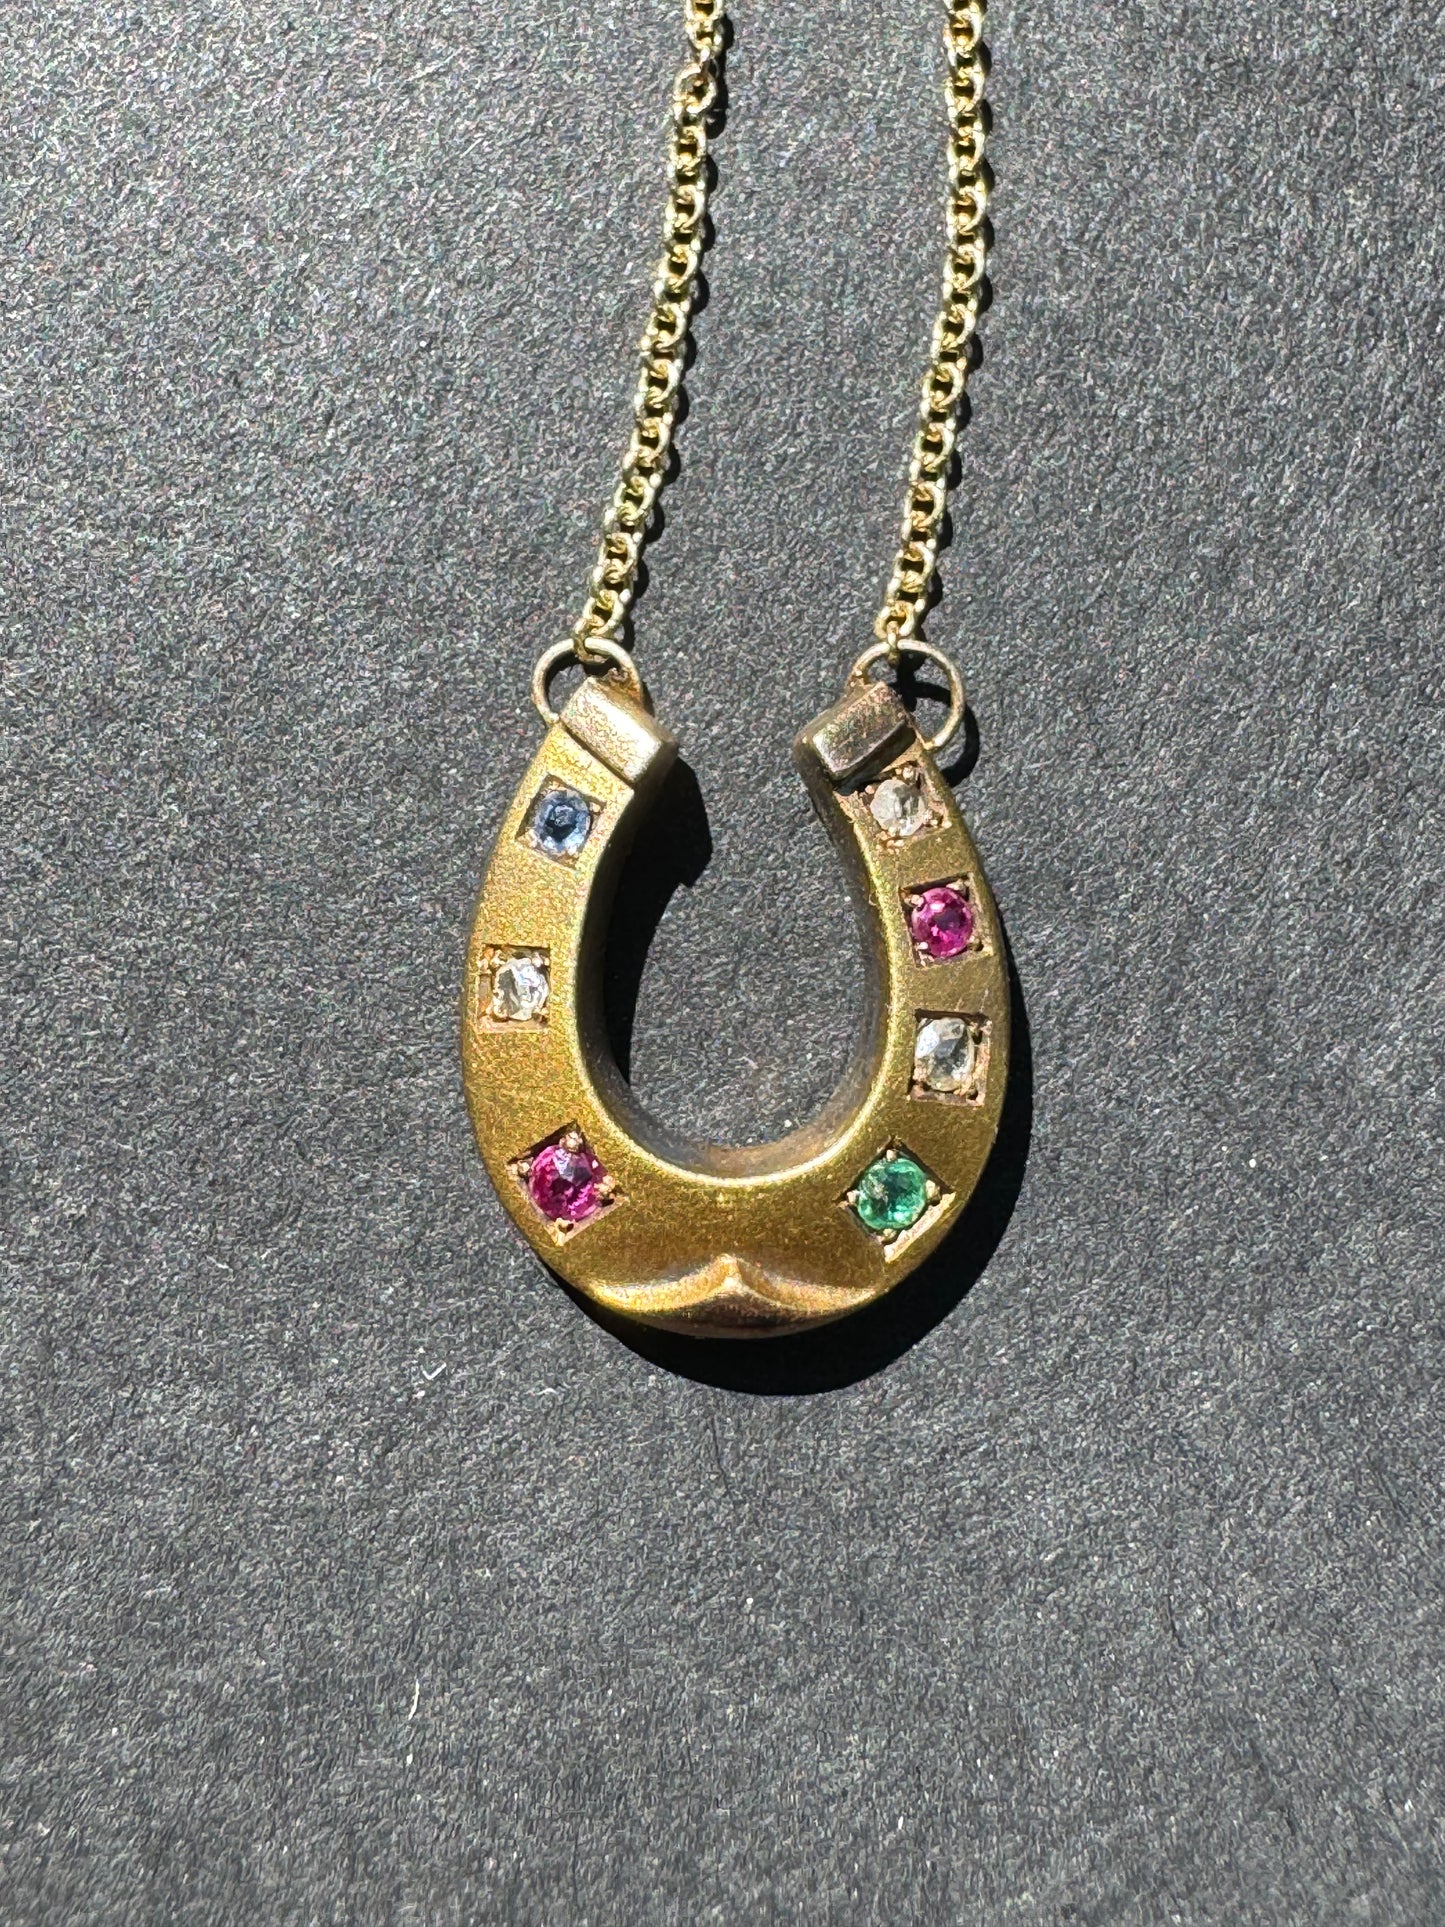 18k French Horseshoe with Gems on 14k Gold Chain